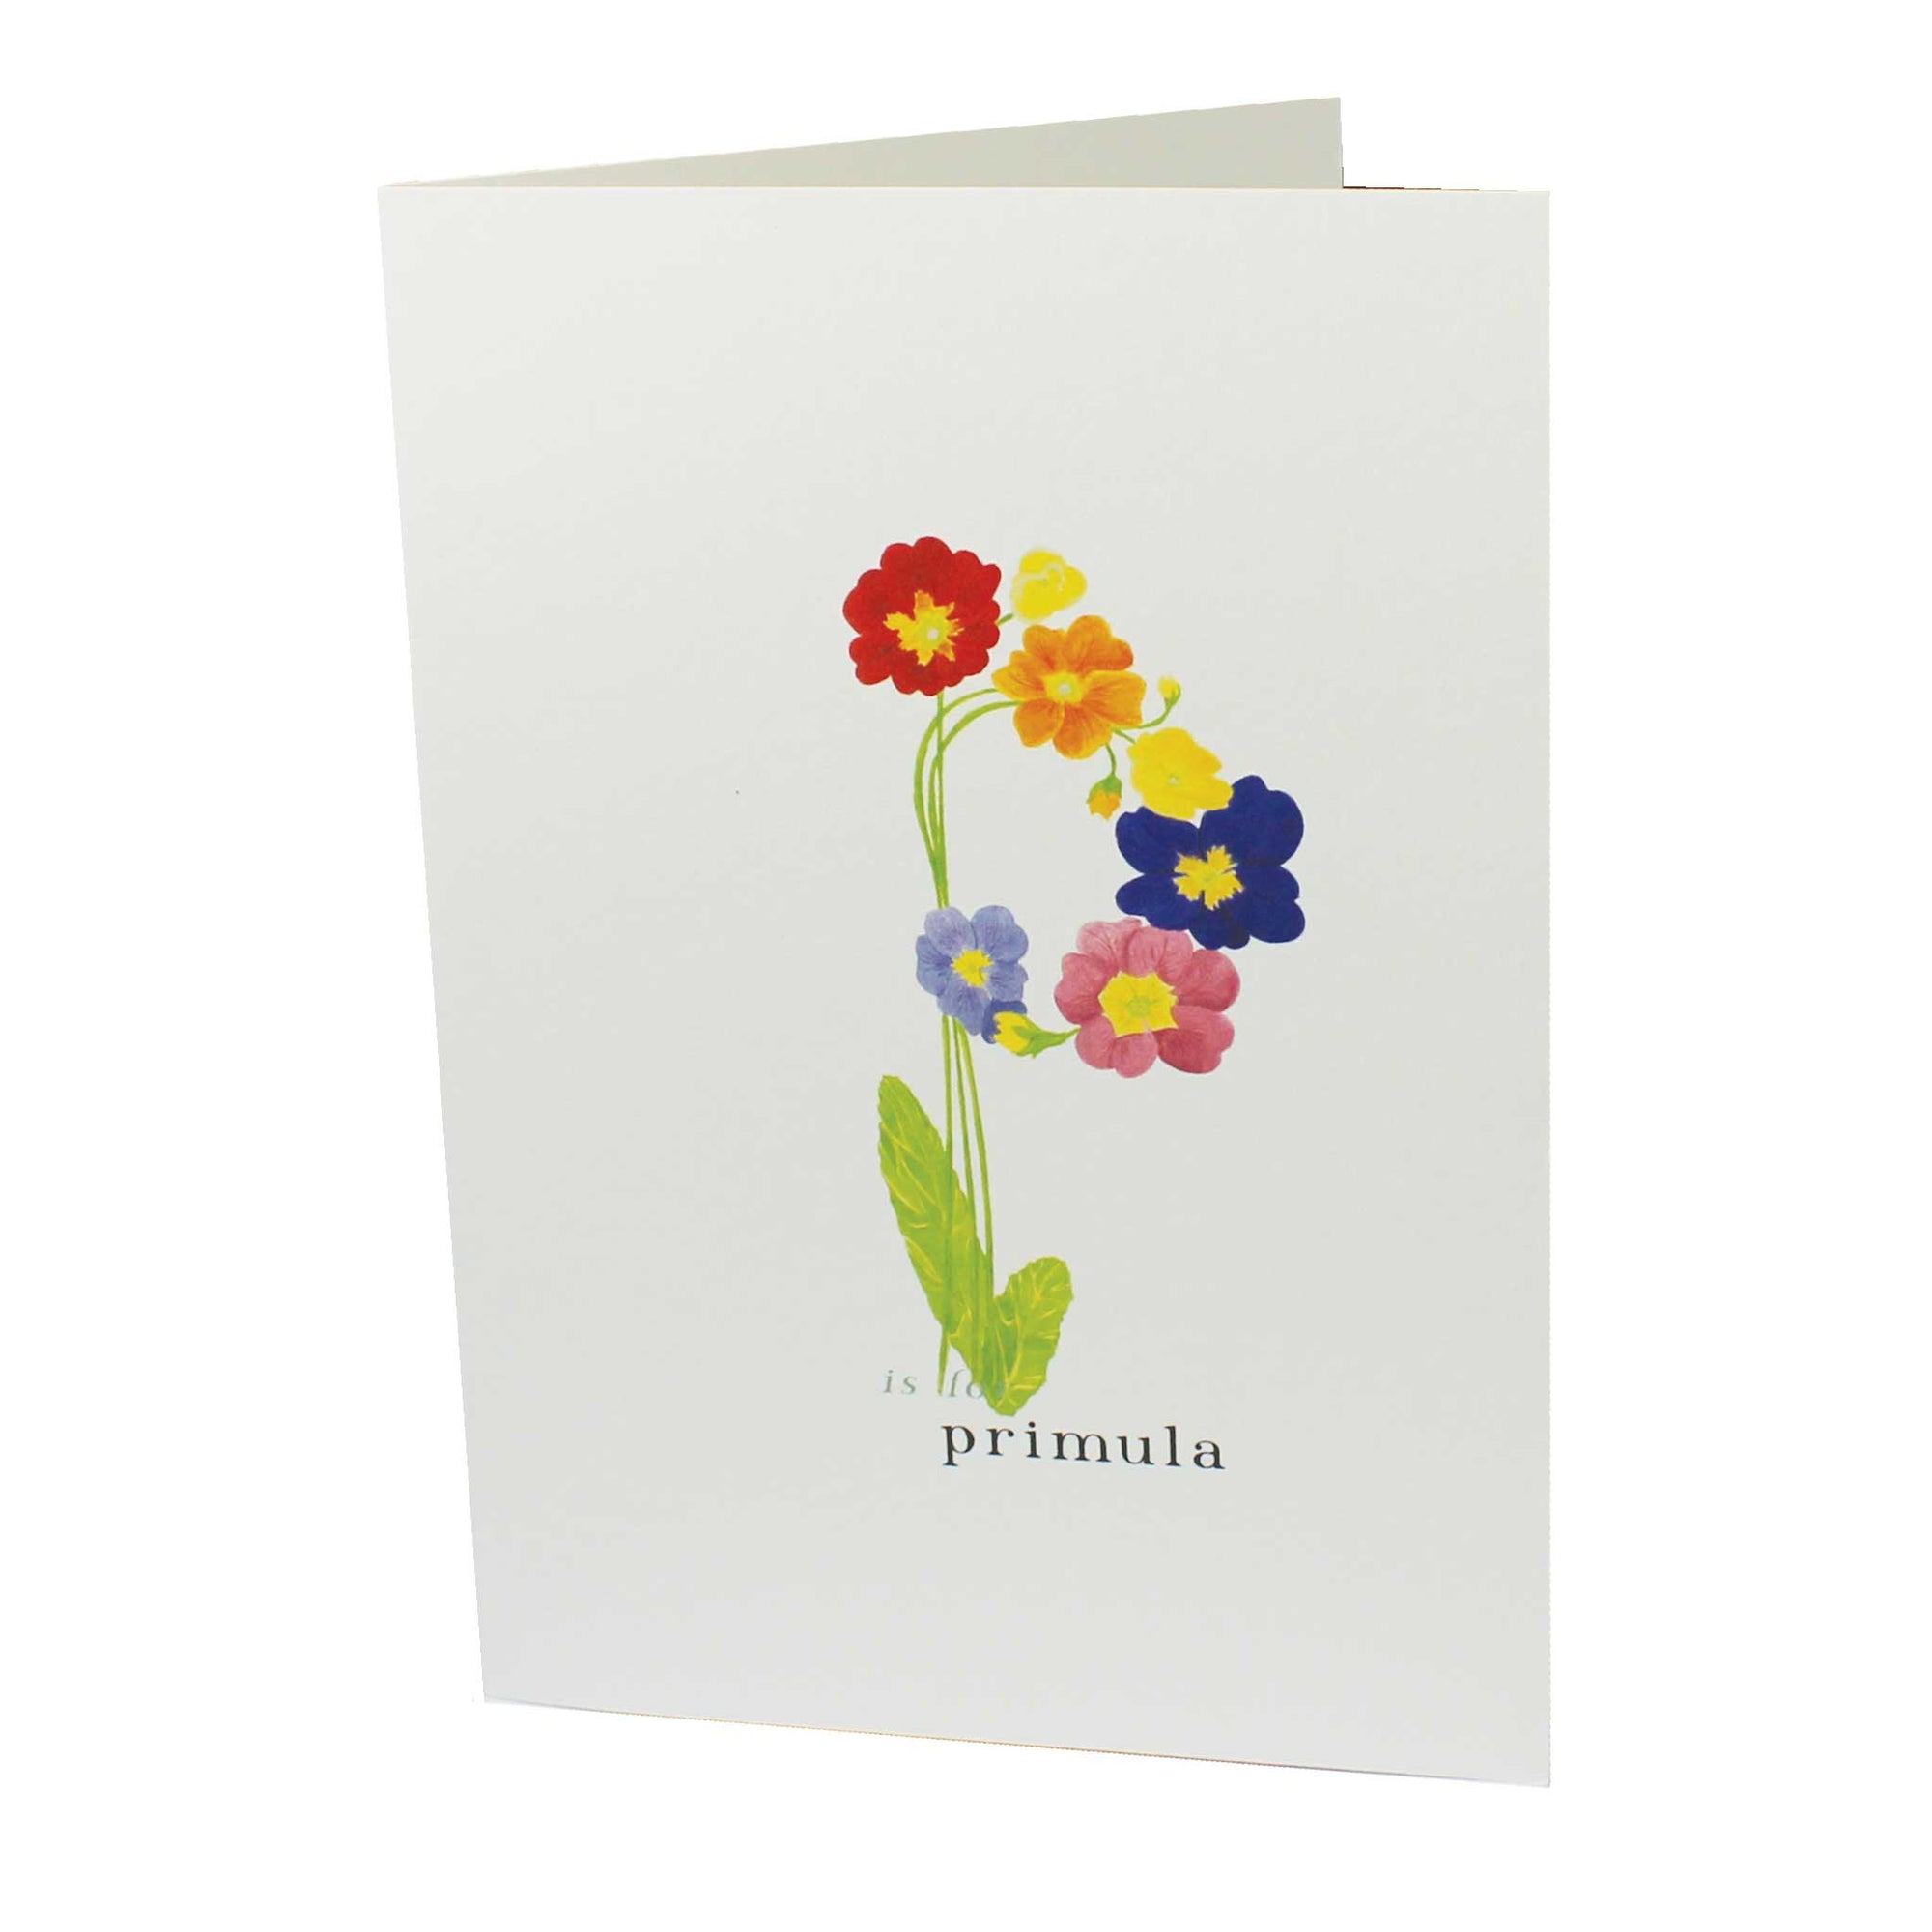 P is for Primula